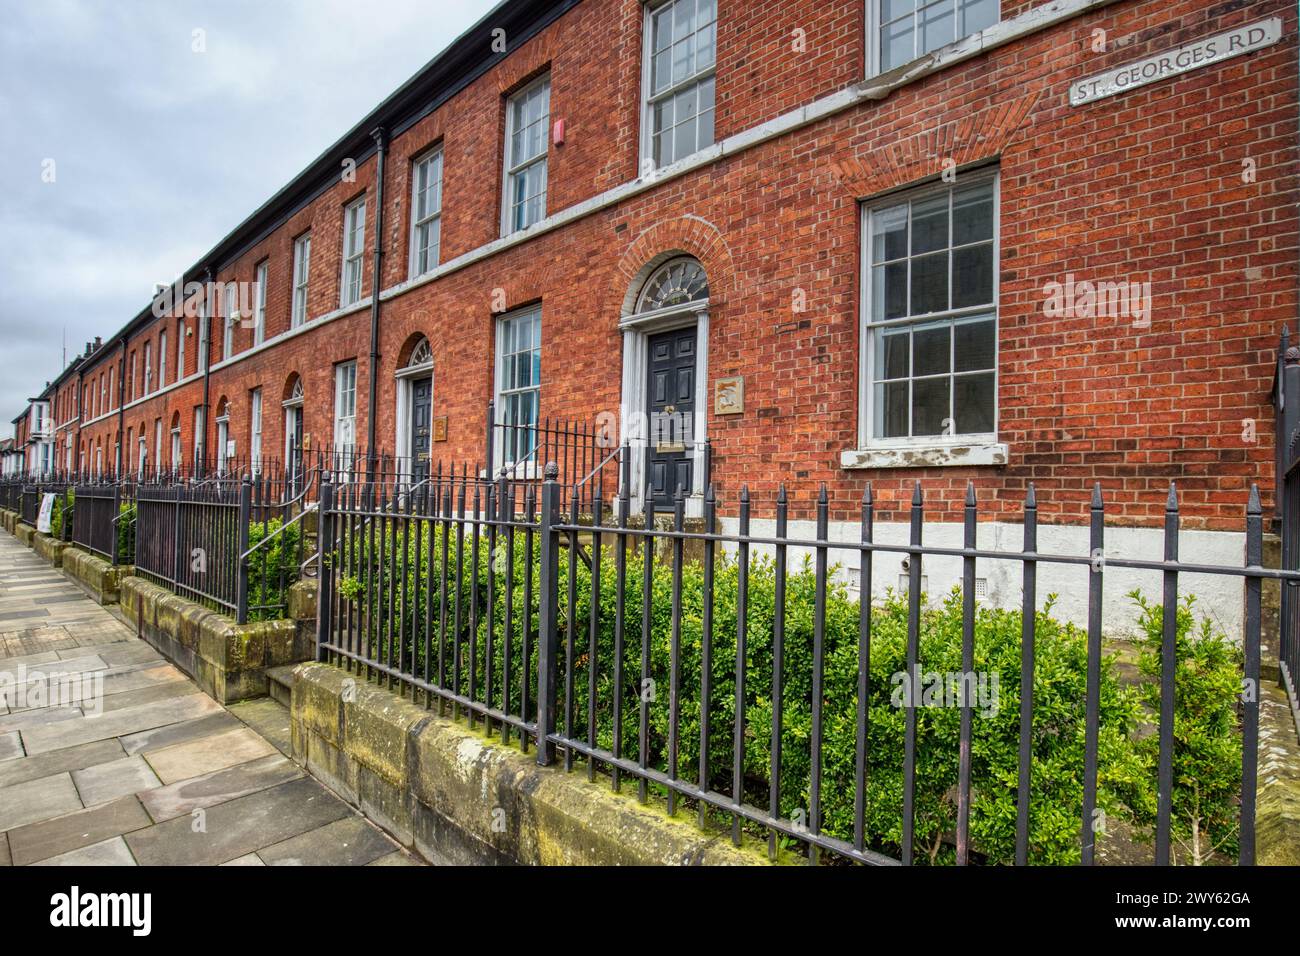 St. George's Road, Terraced Houses, Bolton, Lancashire, England Stock Photo